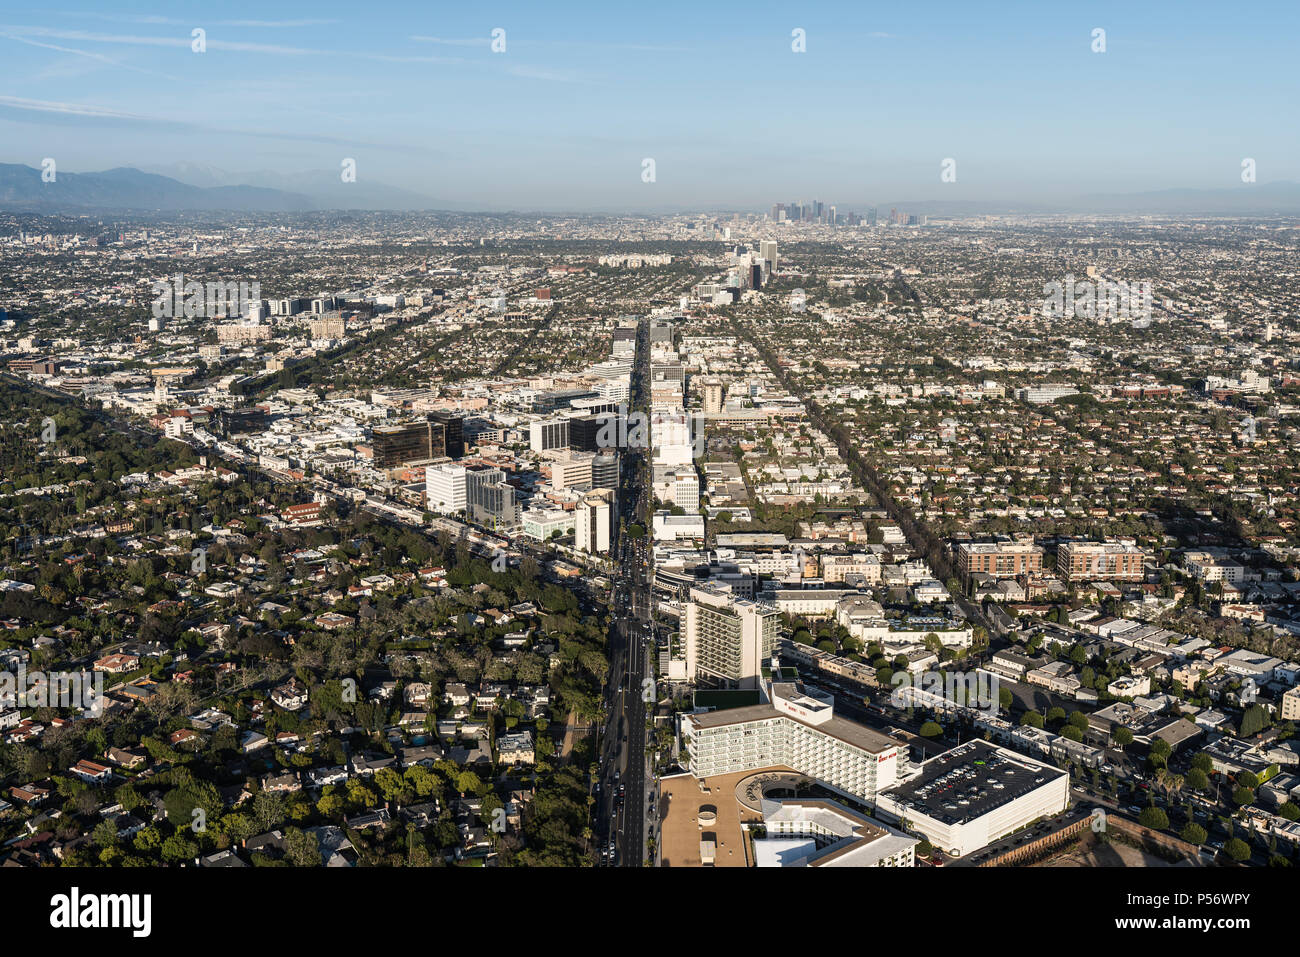 Beverly Hills, California, USA - April 18, 2018:  Aerial view towards Wilshire Bl and Santa Monica Blvd with downtown LA in background. Stock Photo